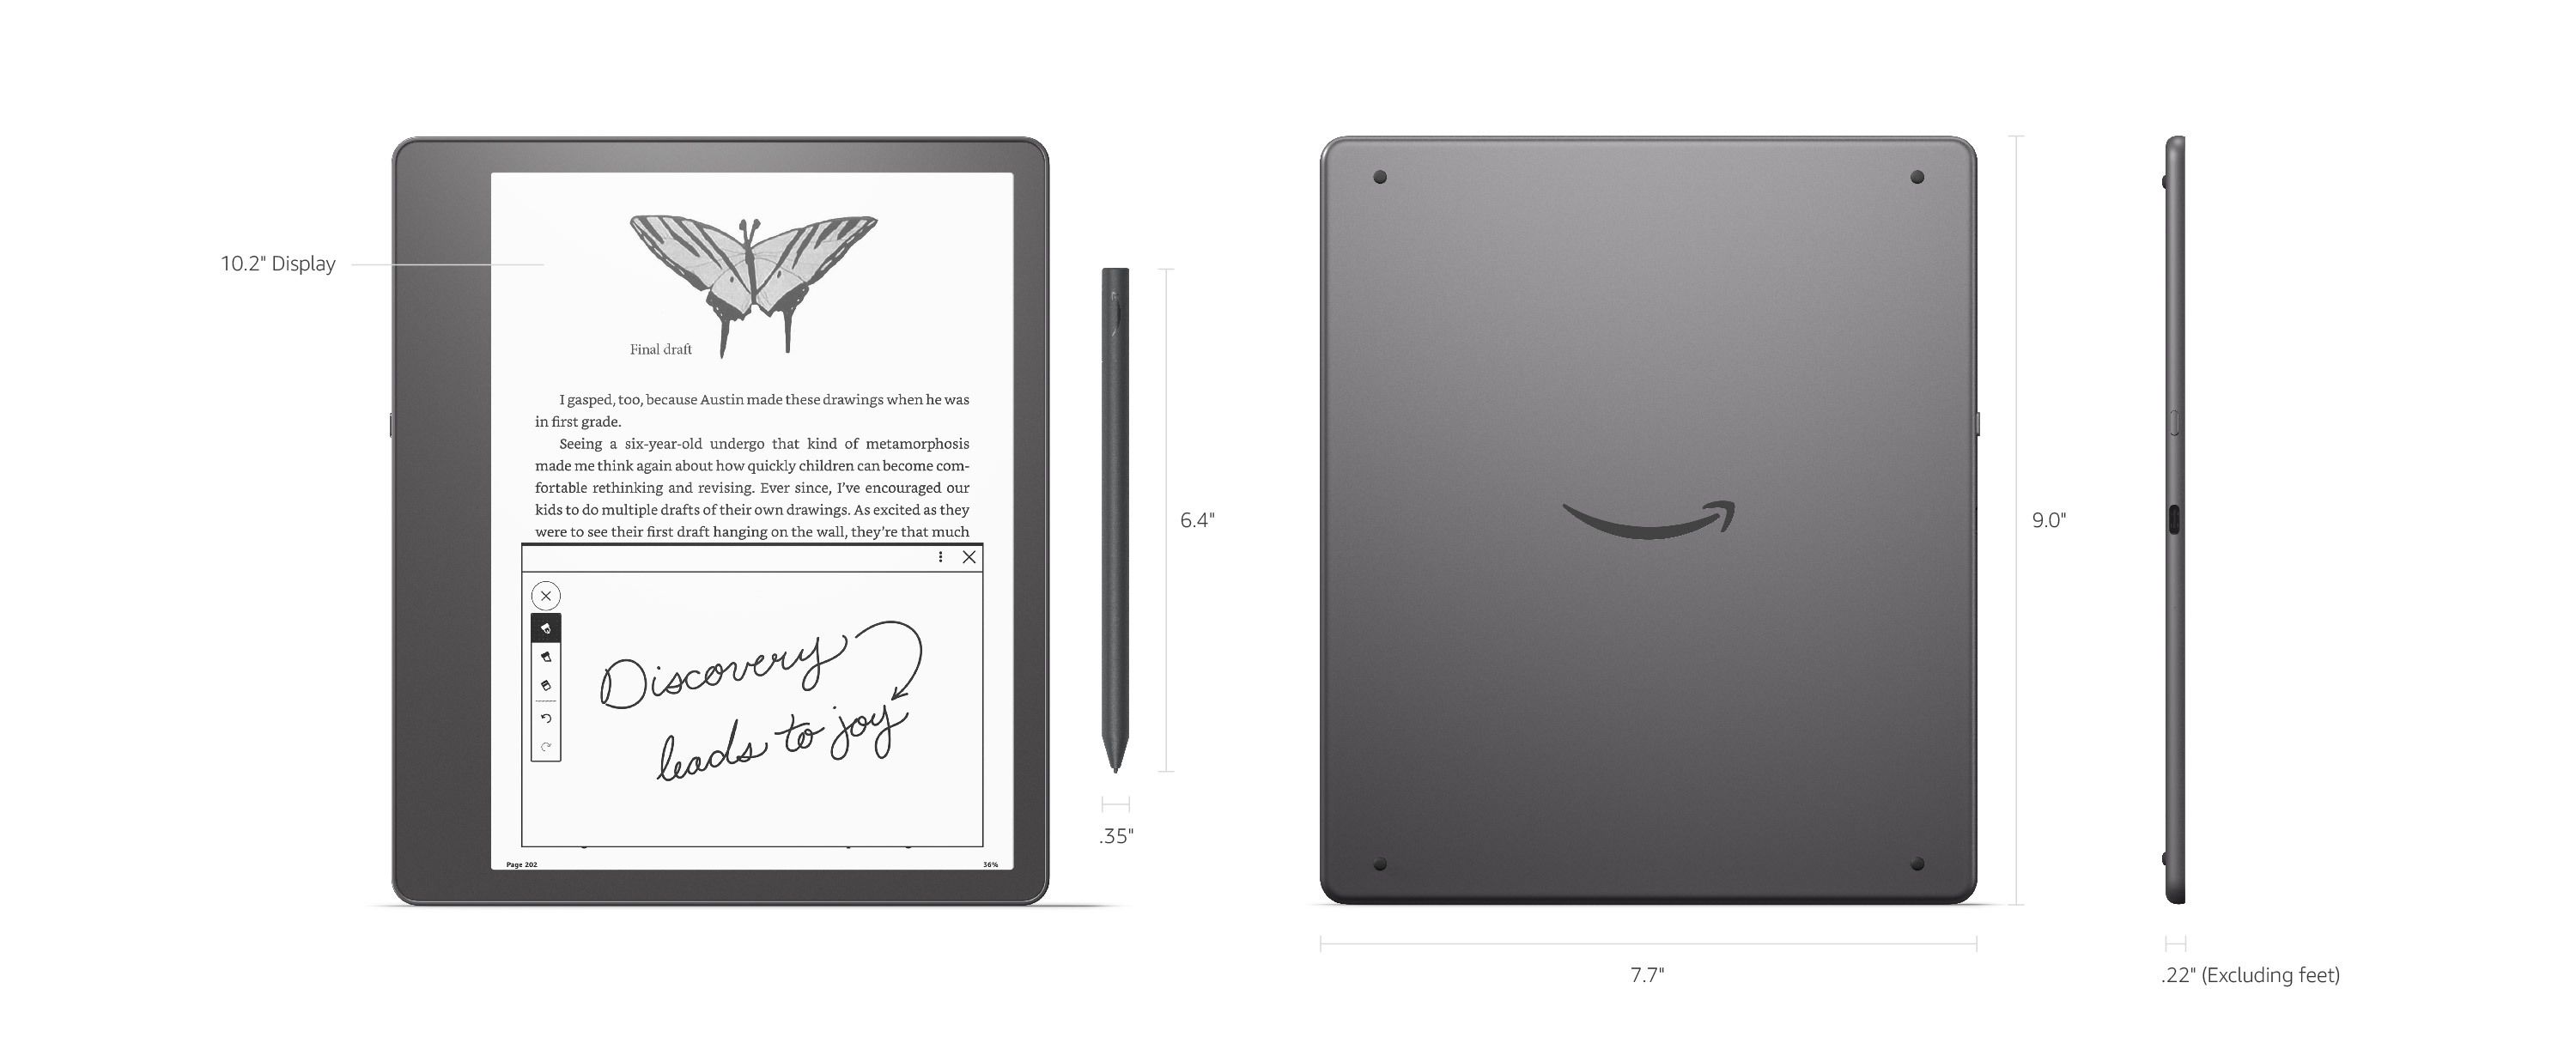 Introducing Kindle Scribe (16 GB), the first Kindle for reading and writing, with a 10.2” 300 p... | Amazon (US)